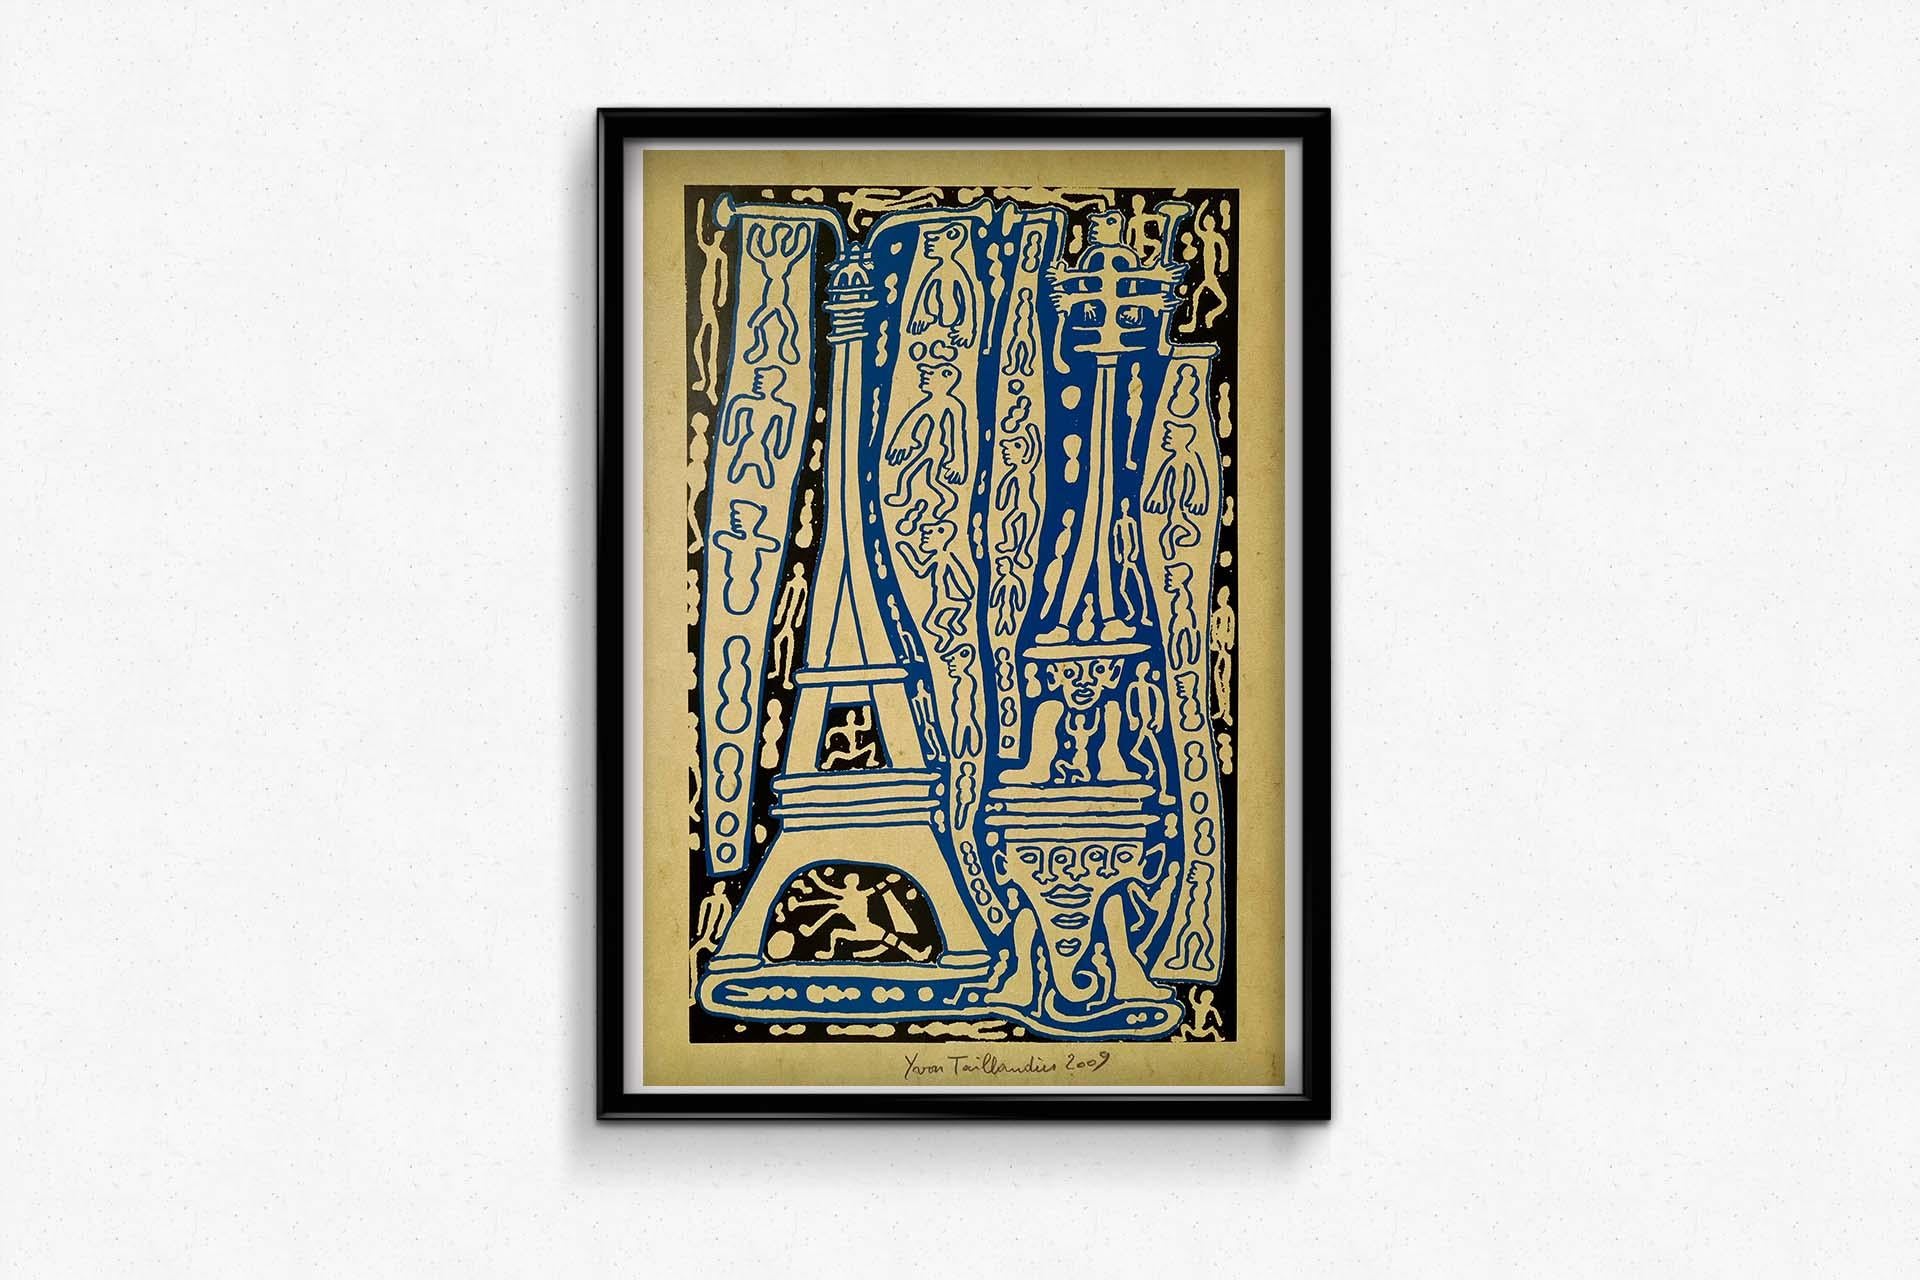 Original serigraphy of Yvon Taillandier representing the Eiffel Tower - Abstract For Sale 3